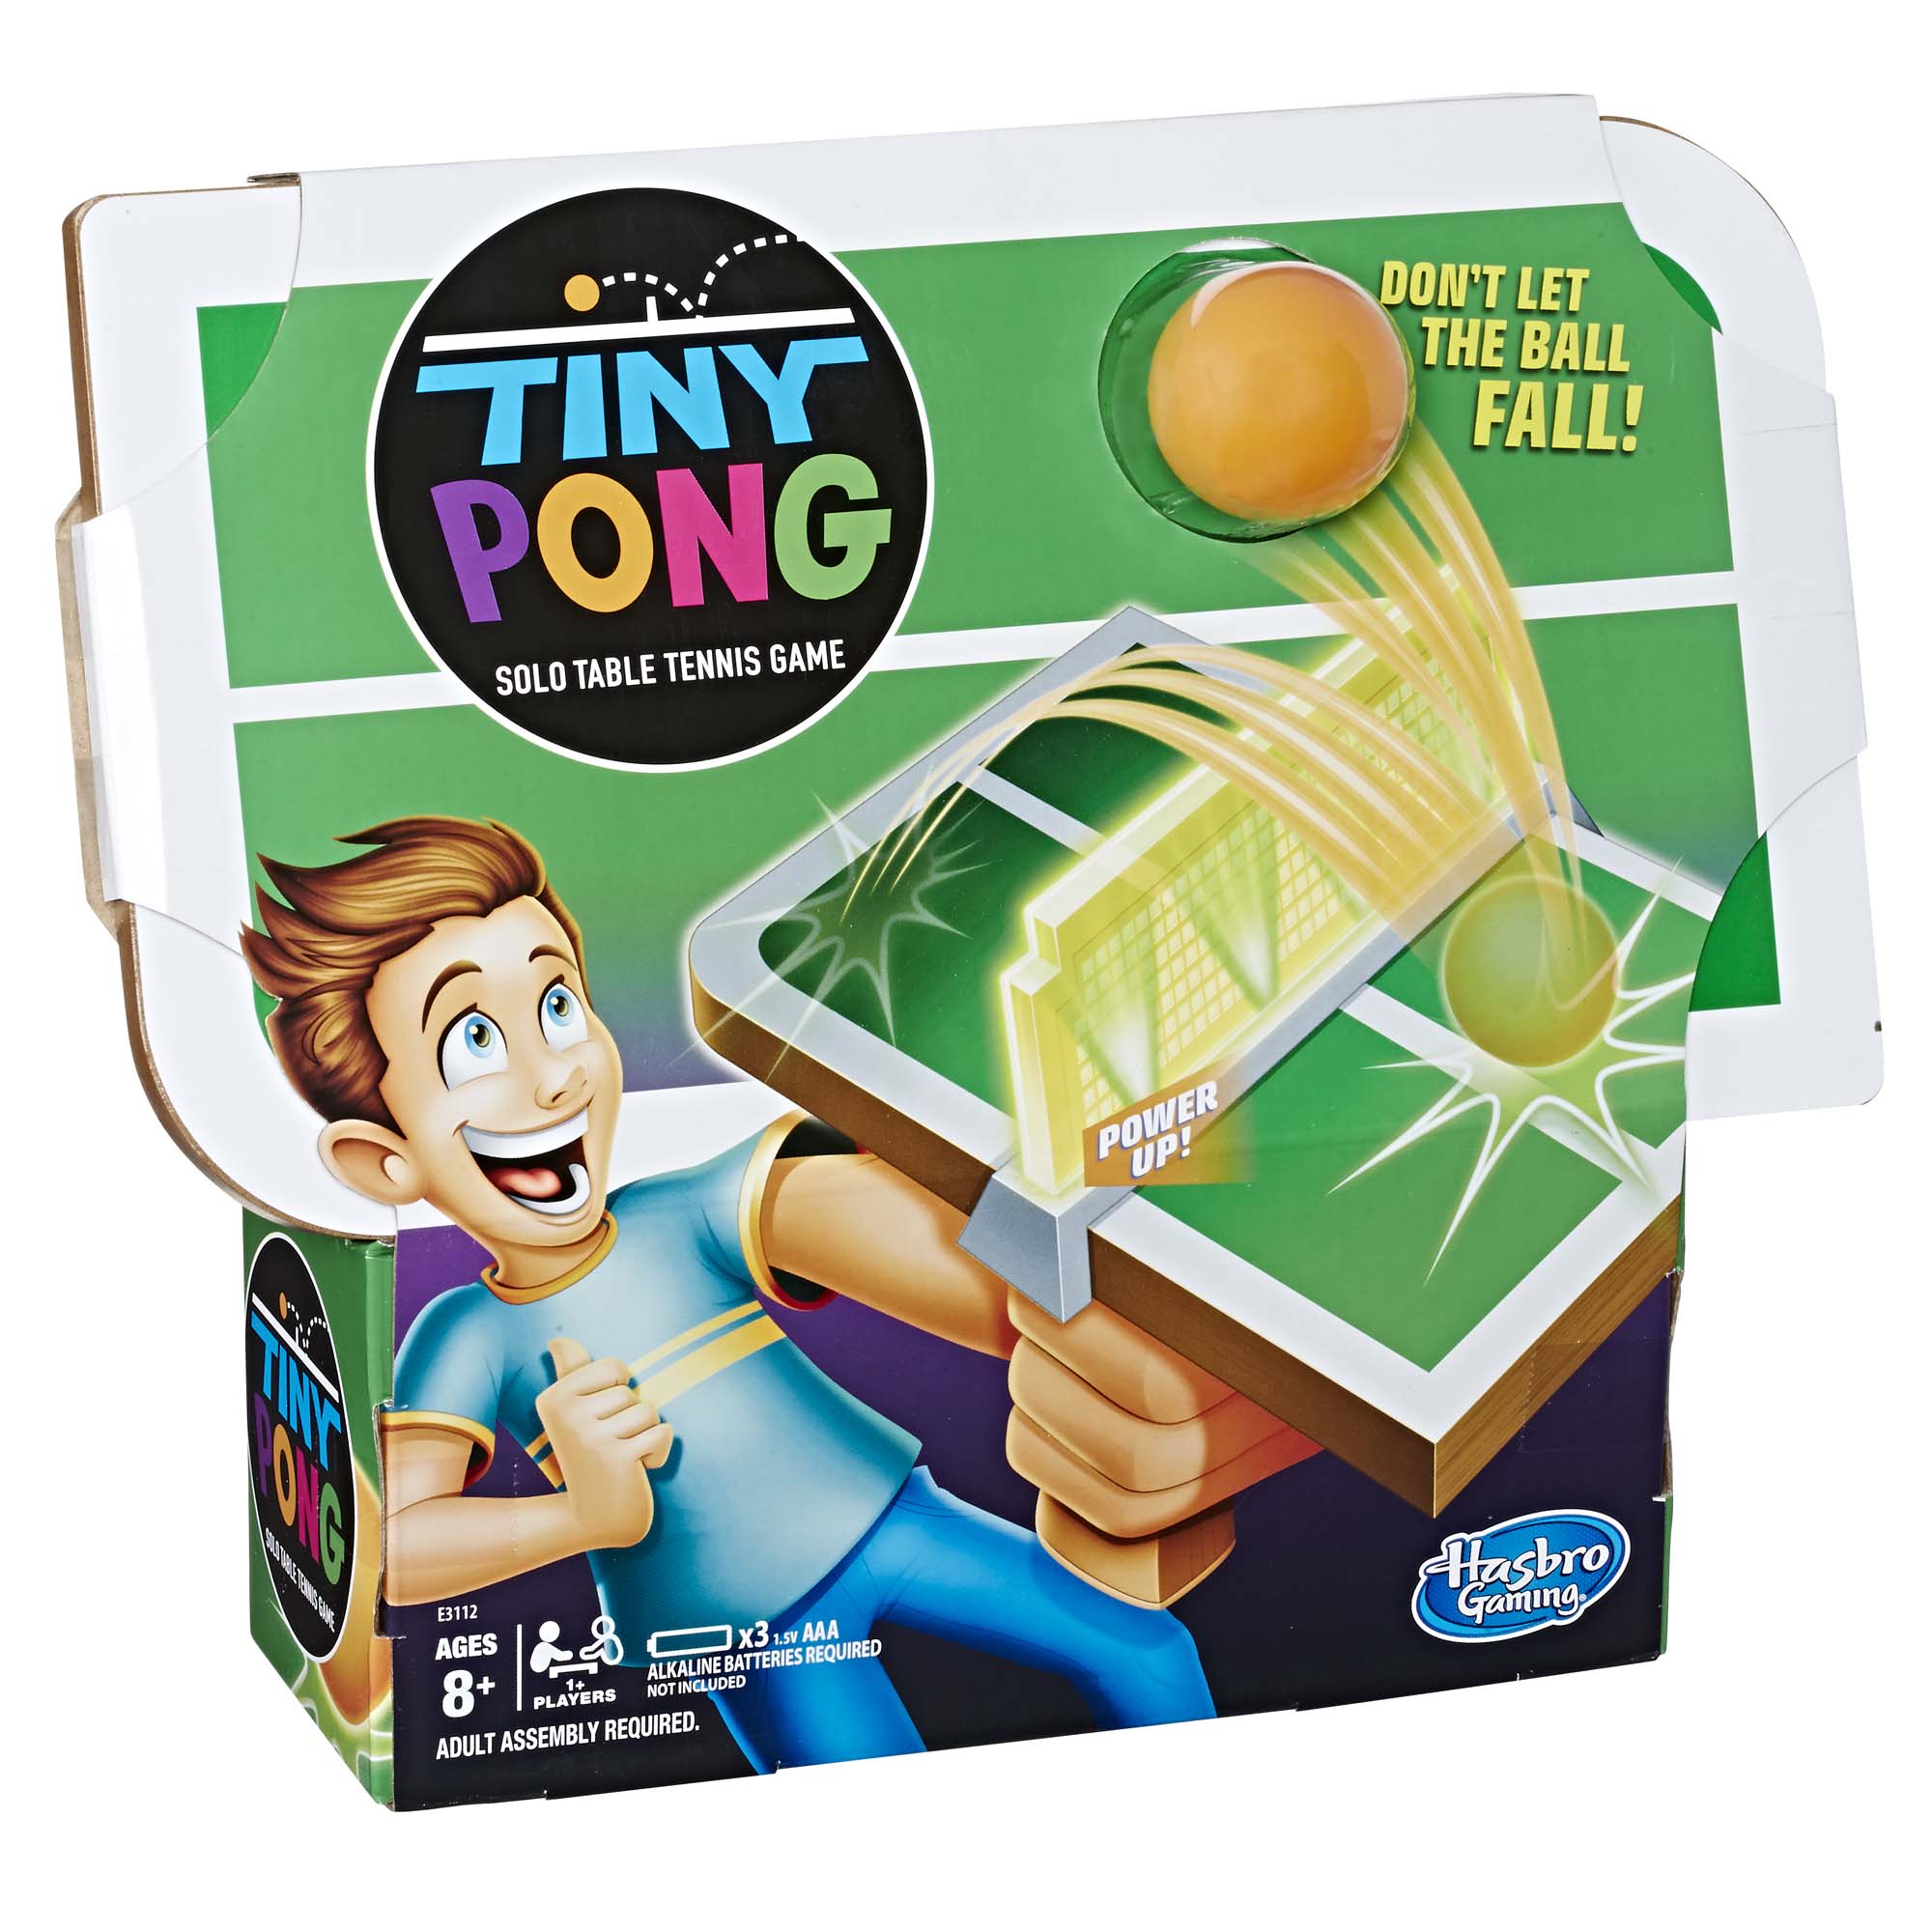 Tiny Pong Solo Table Tennis Kids Electronic Handheld Game - image 3 of 14